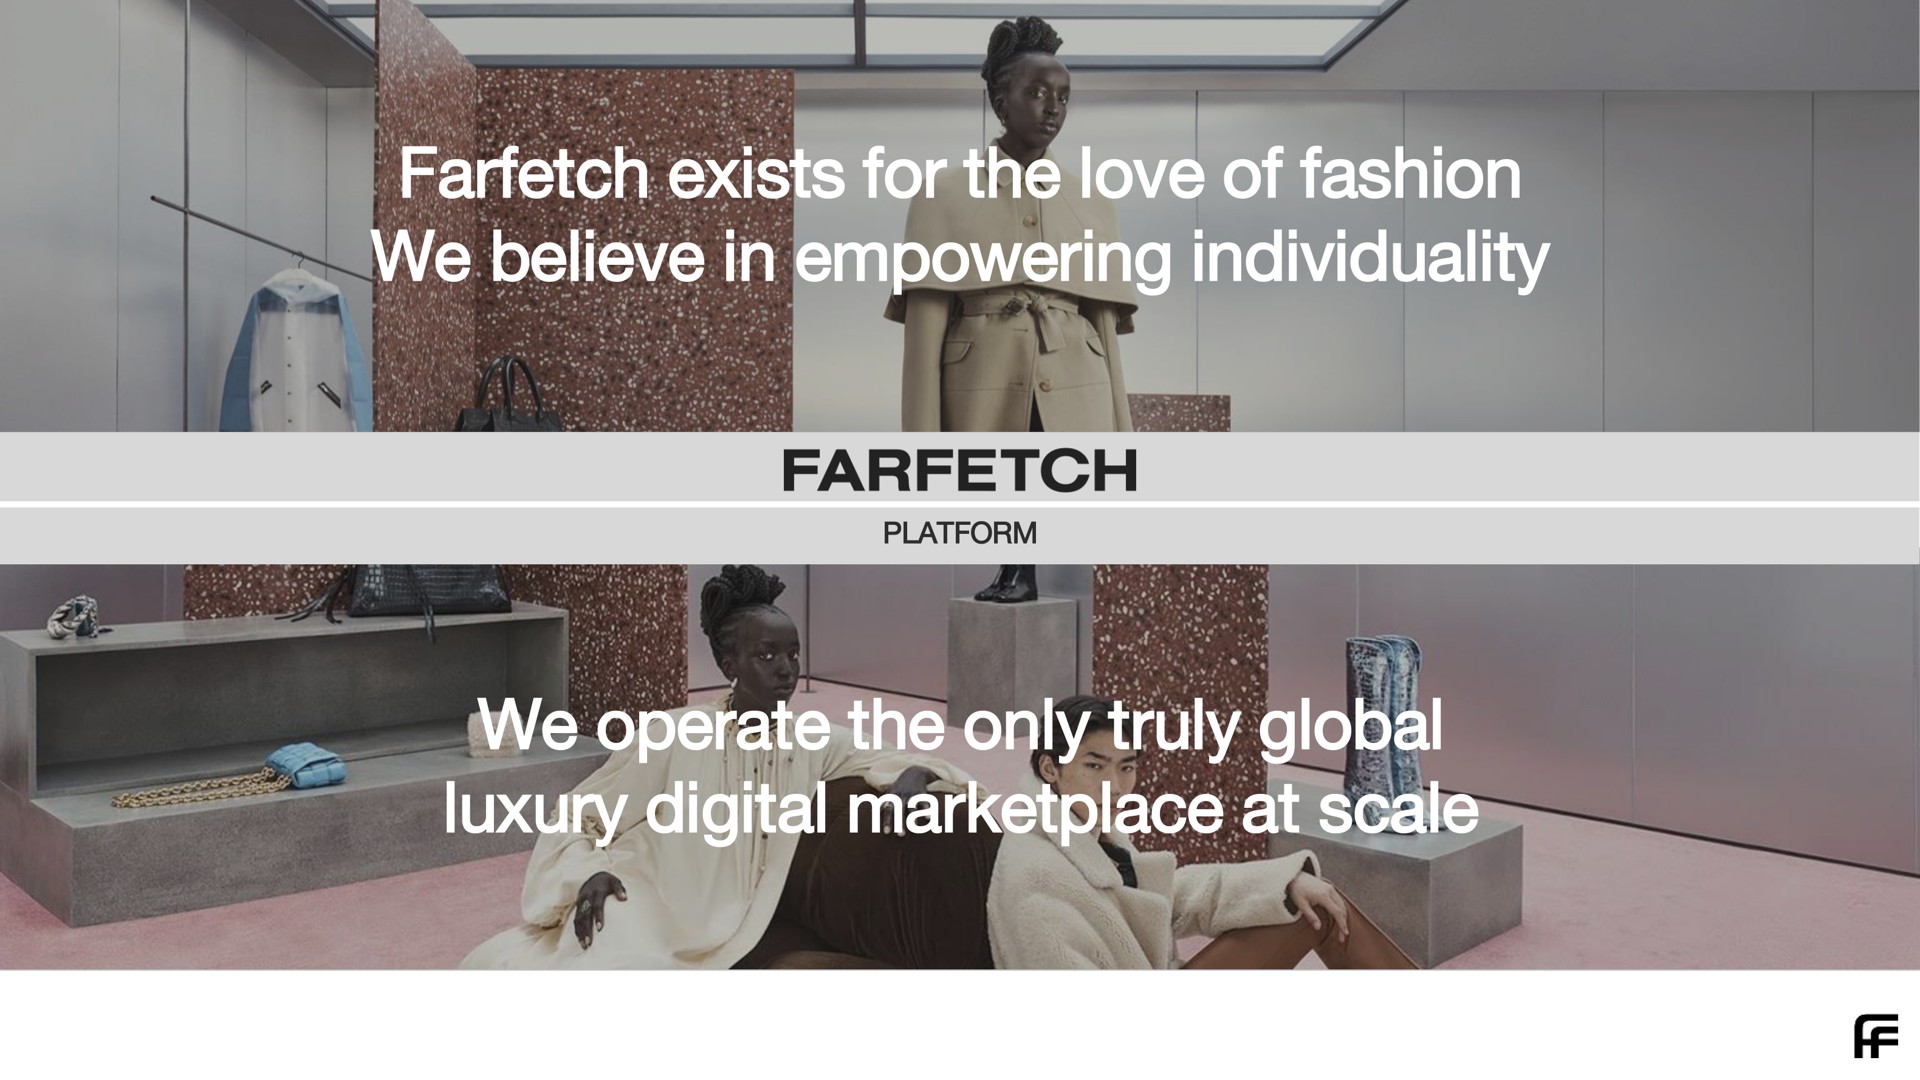 exists for the love of fashion we believe in empowering individuality we operate the only truly global luxury digital at scale a | Farfetch